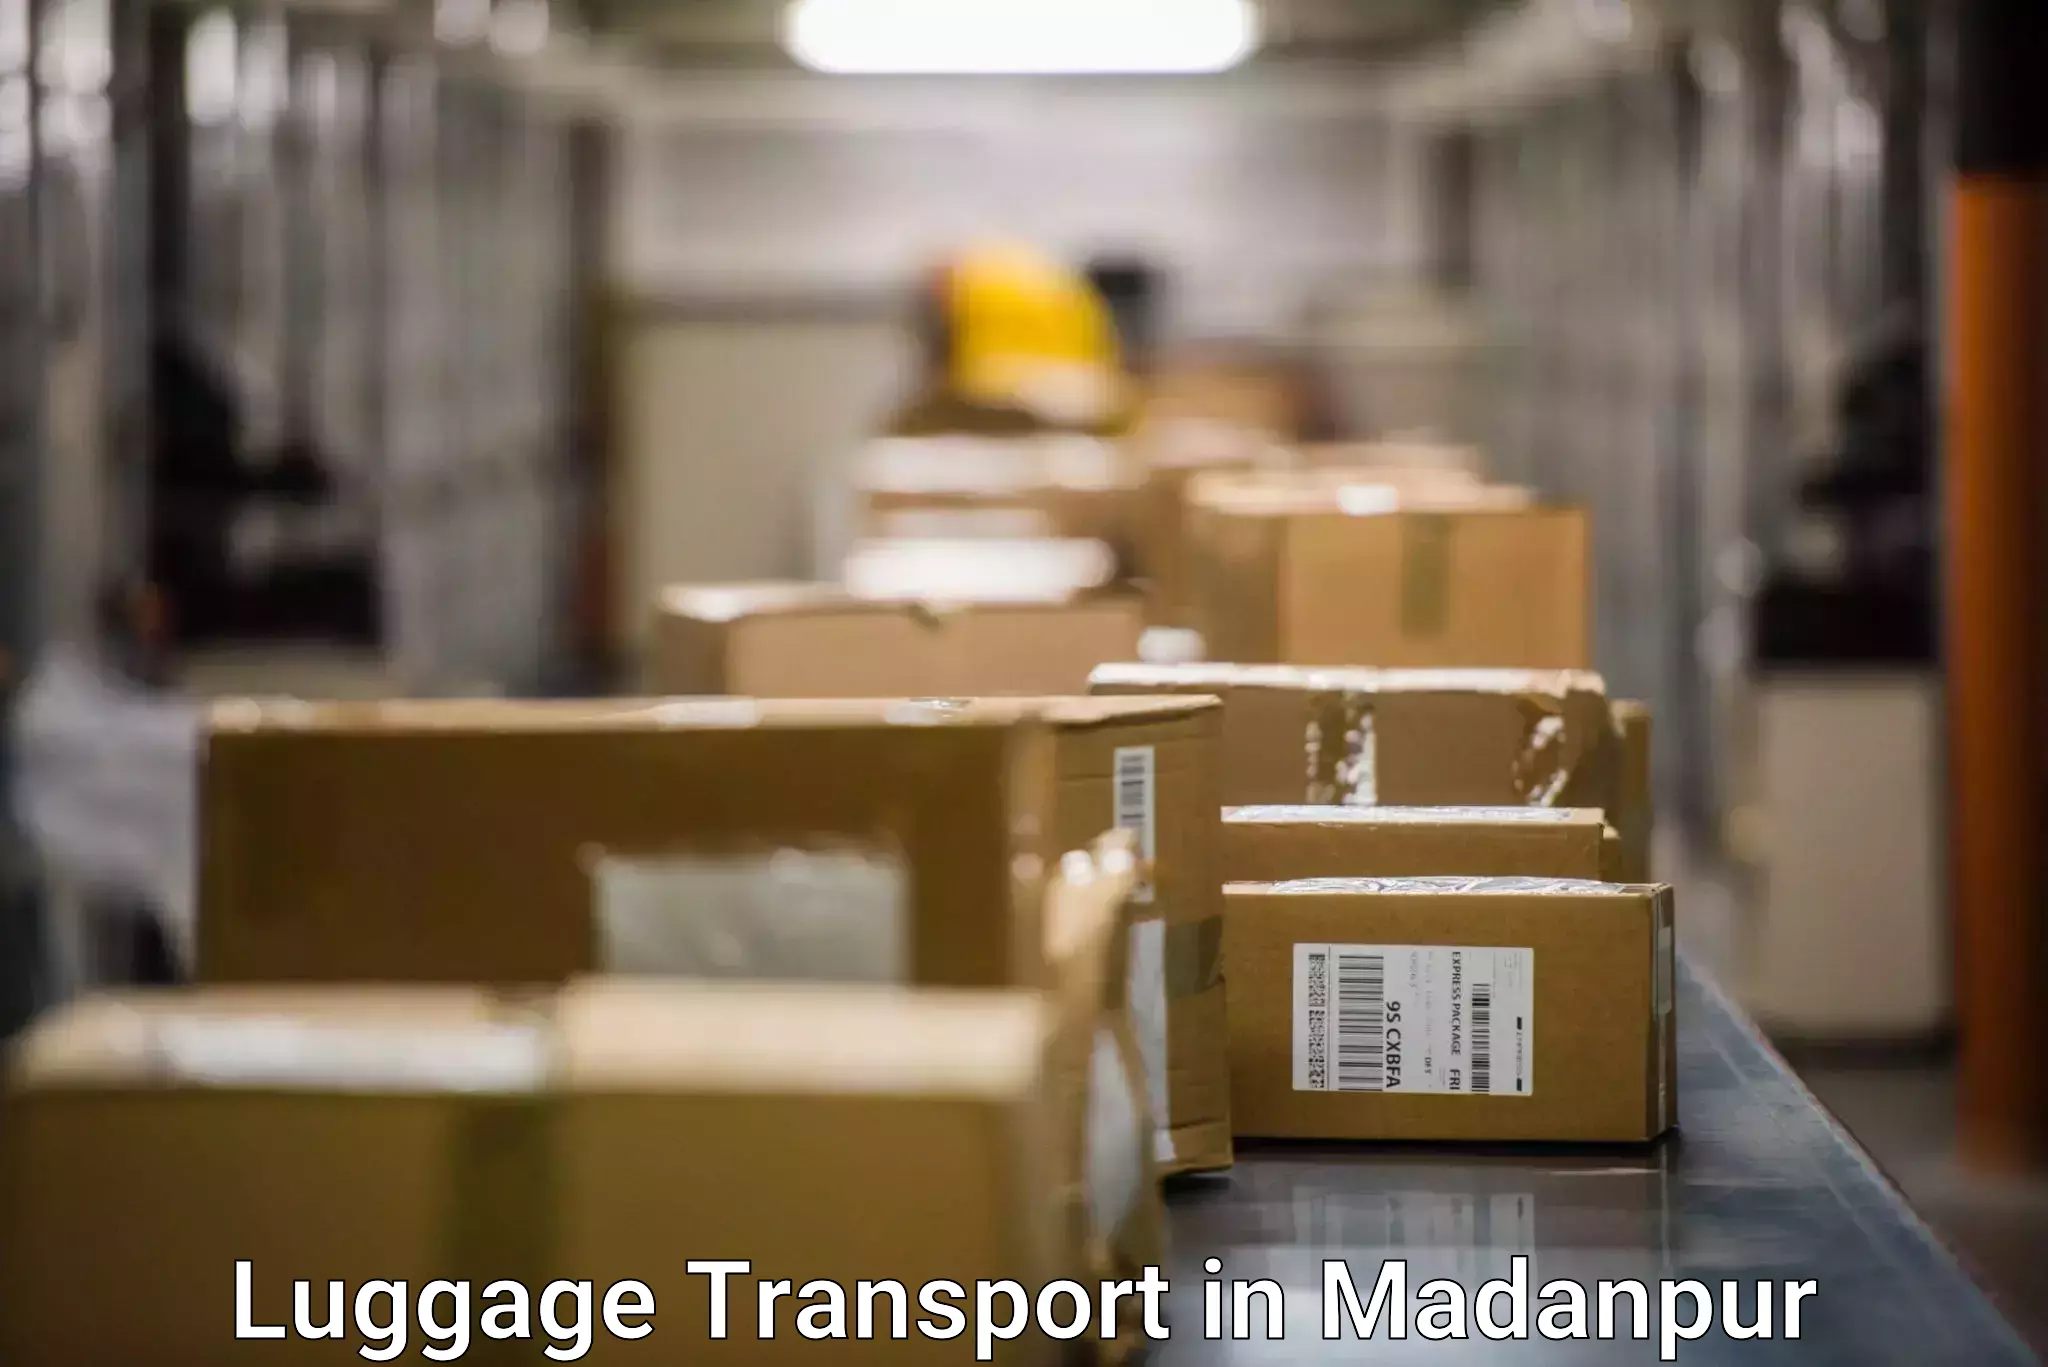 Luggage transport company in Madanpur